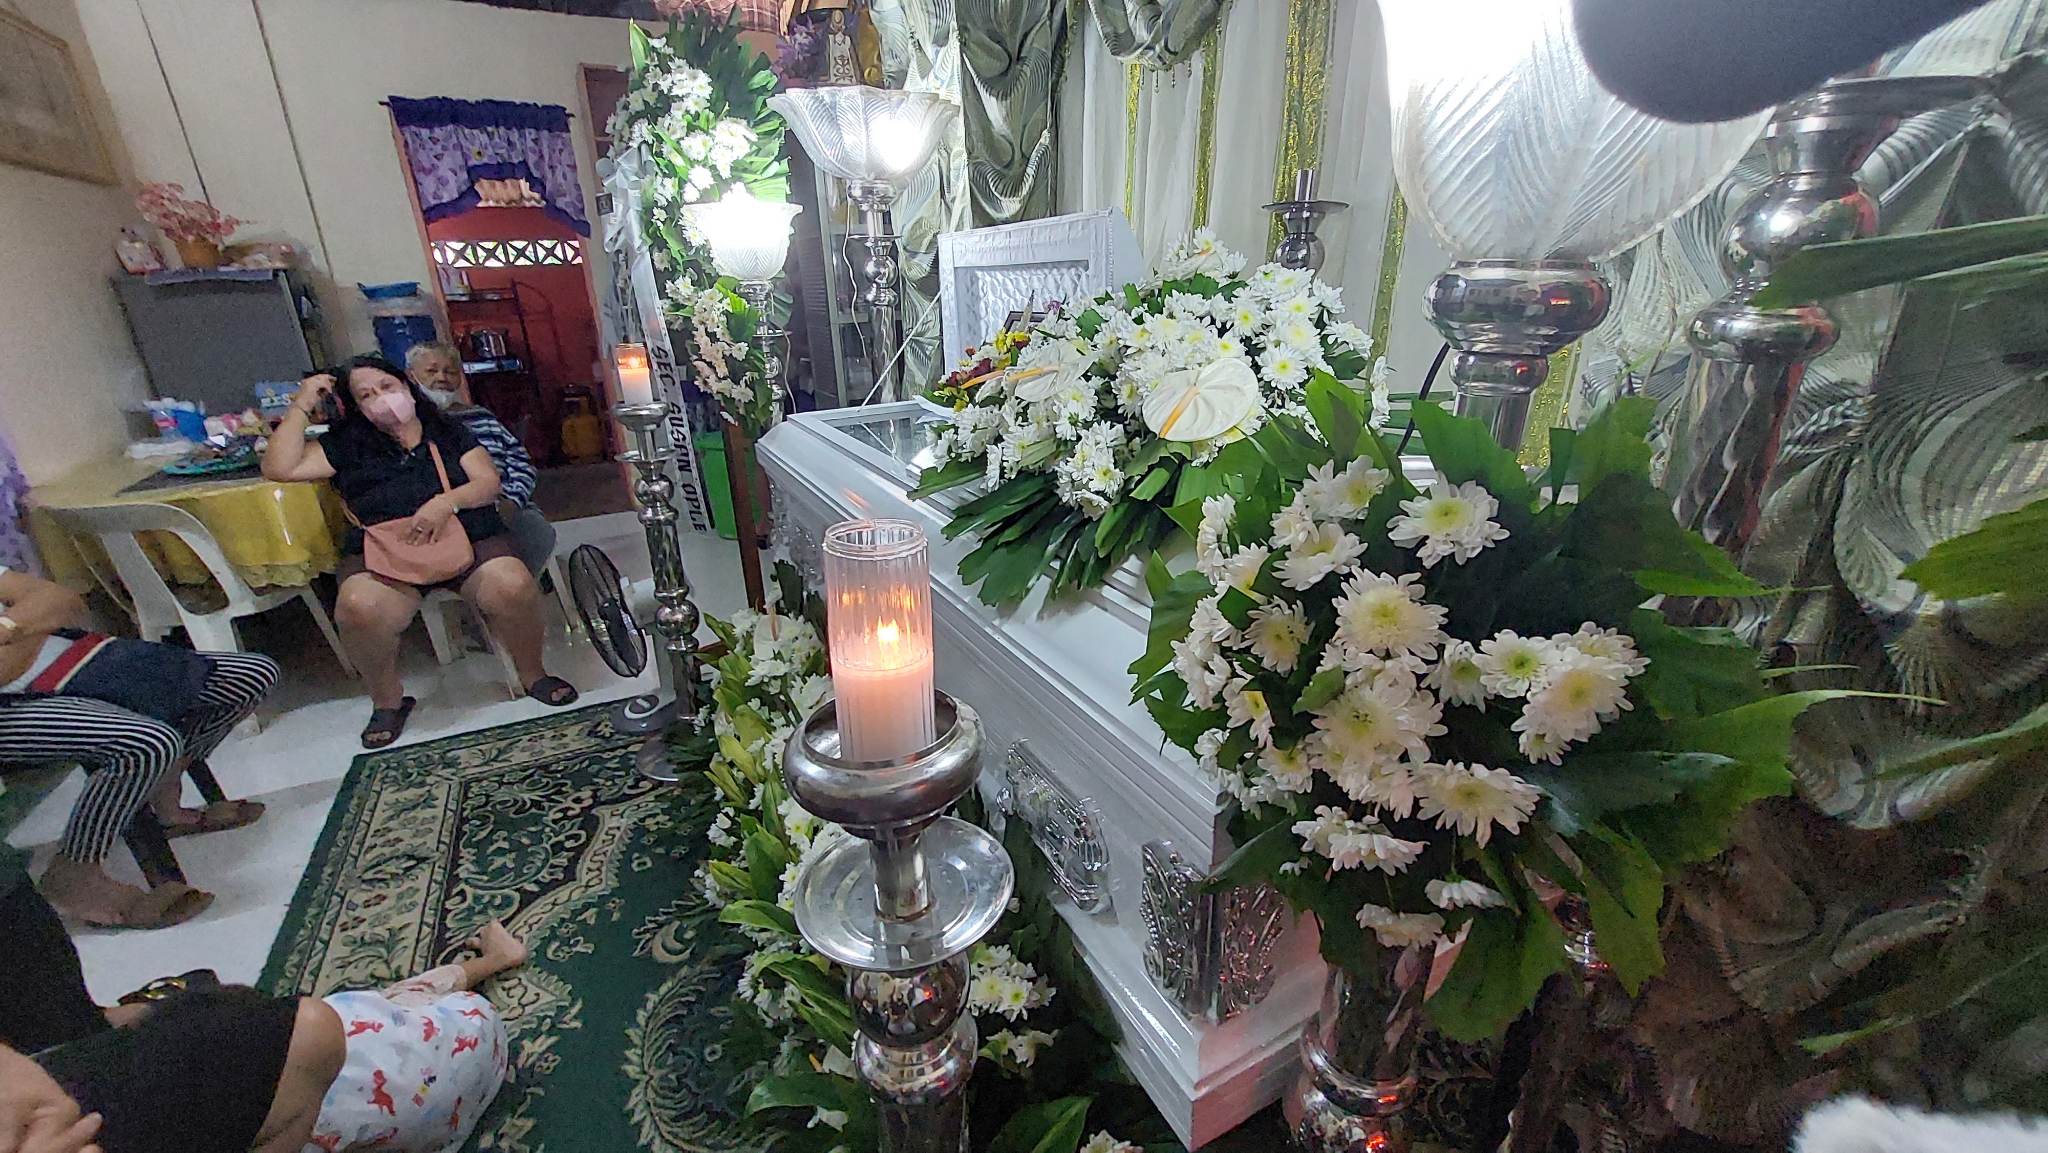 The body of Wilma Tezcan, an earthquake victim in Turkey, lies in state at the family home in Lucena City